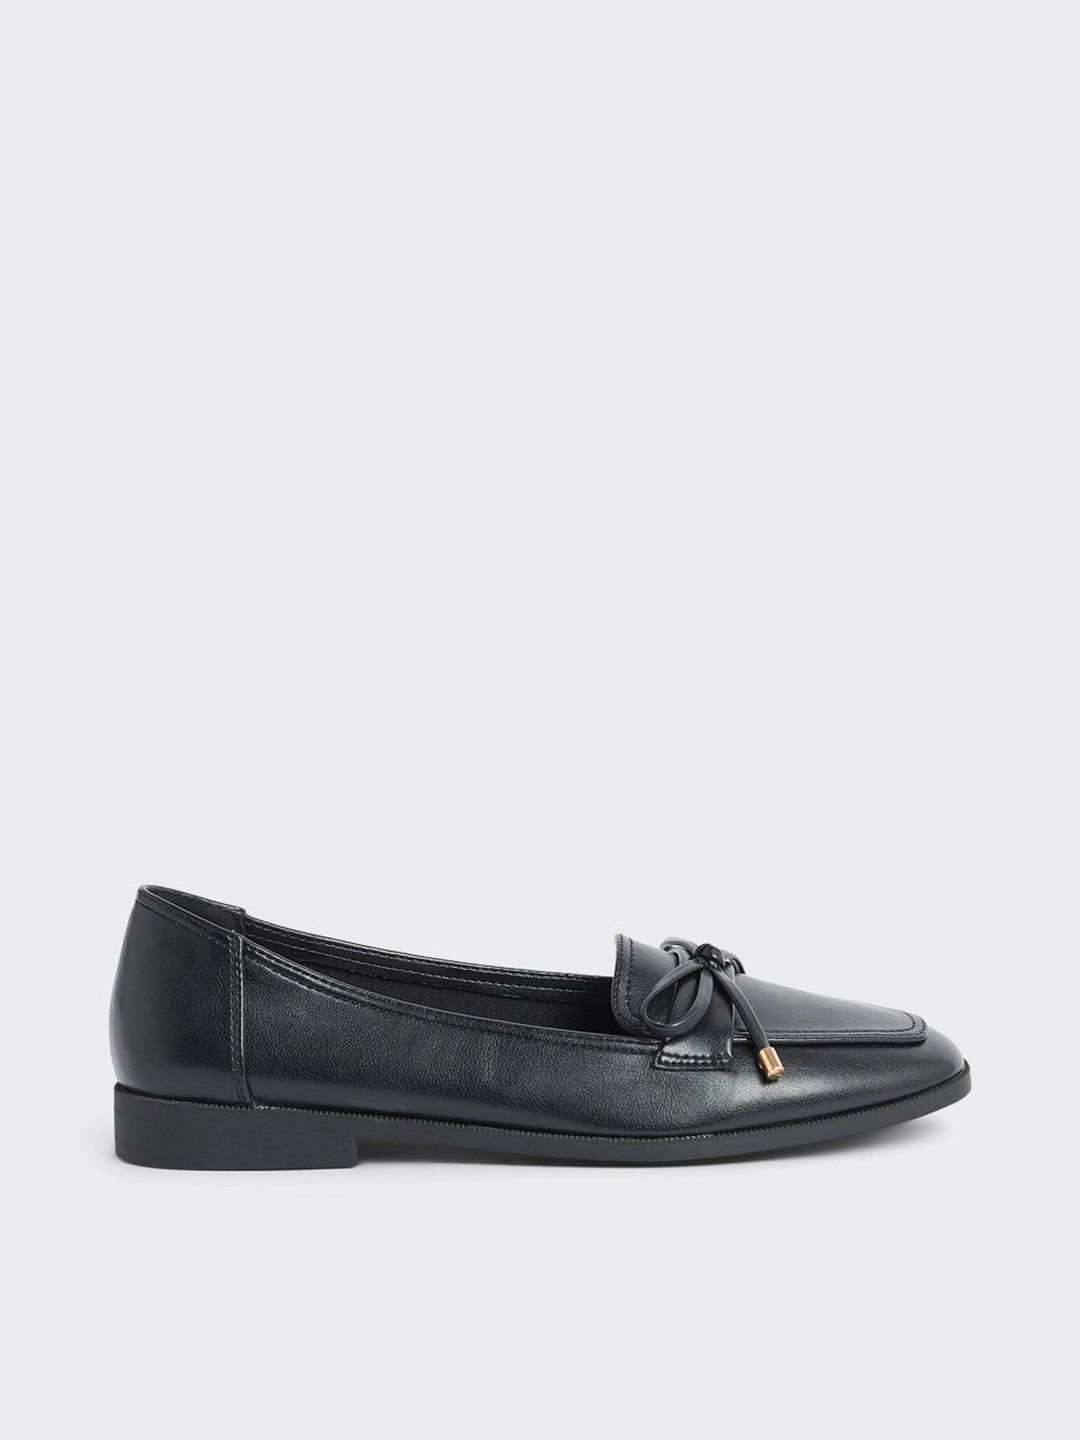 DOROTHY PERKINS Women Black Bow Detail Loafers Price in India